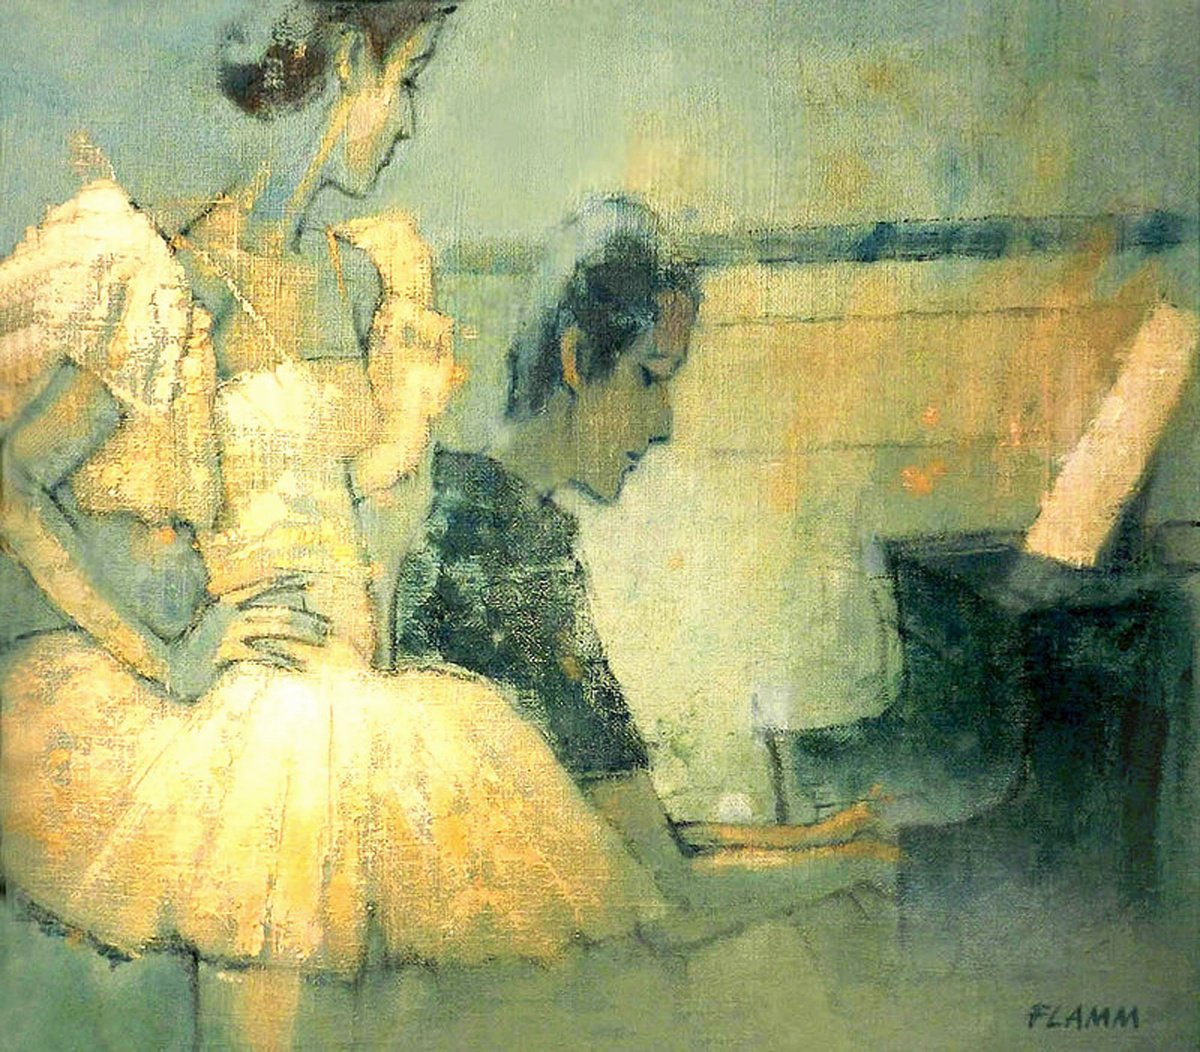 The Accompanist by Ferenc Flamm